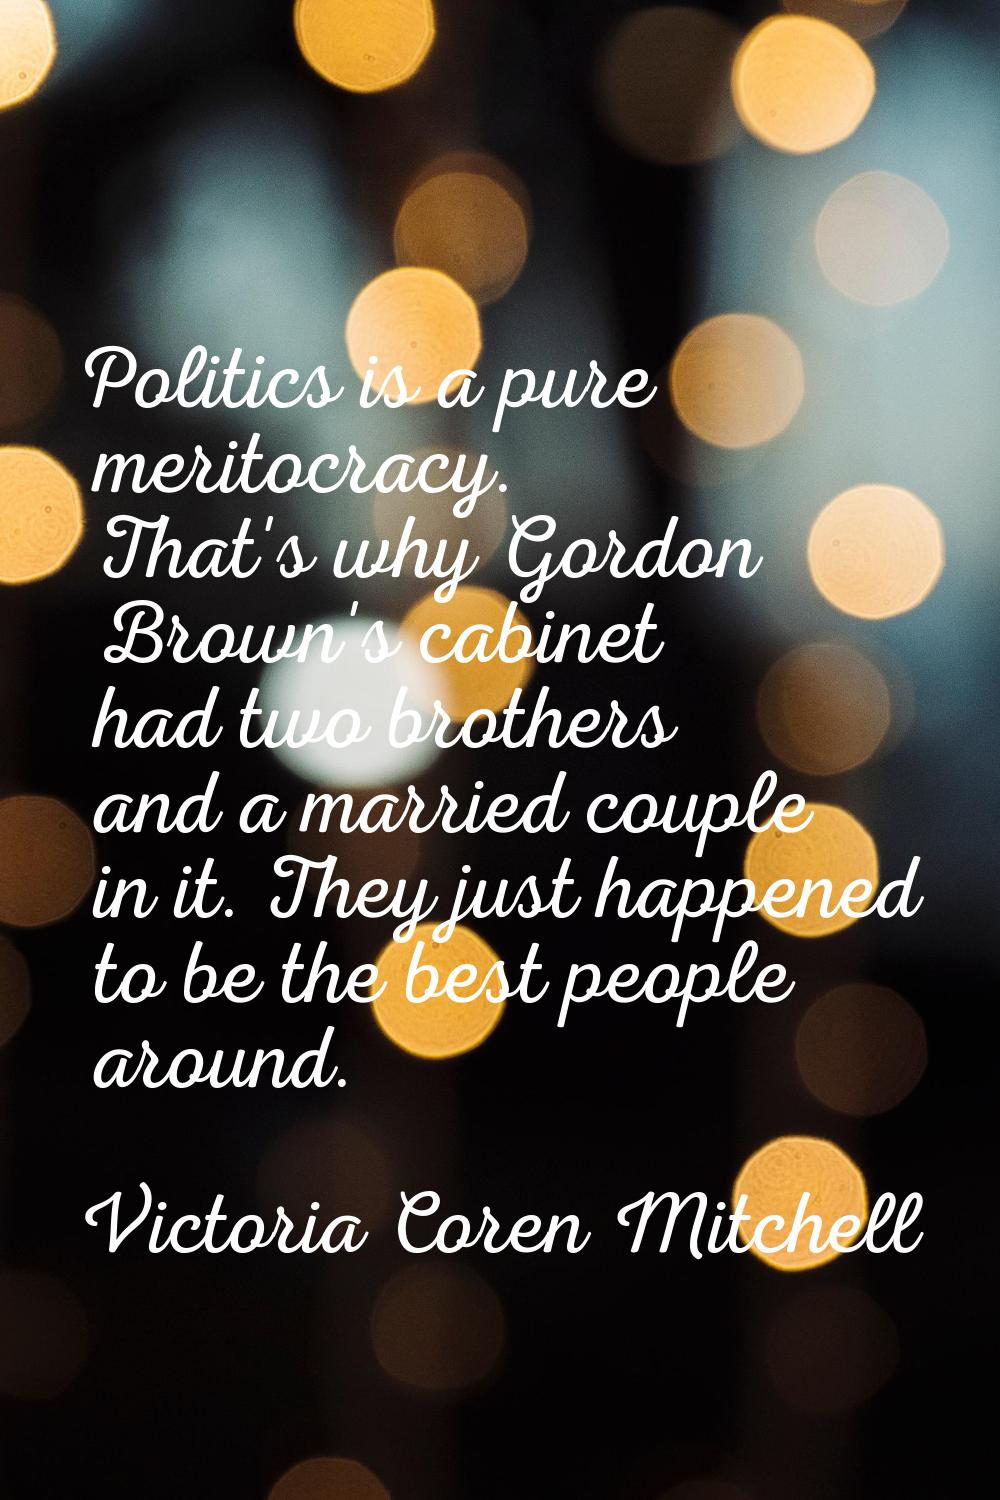 Politics is a pure meritocracy. That's why Gordon Brown's cabinet had two brothers and a married co